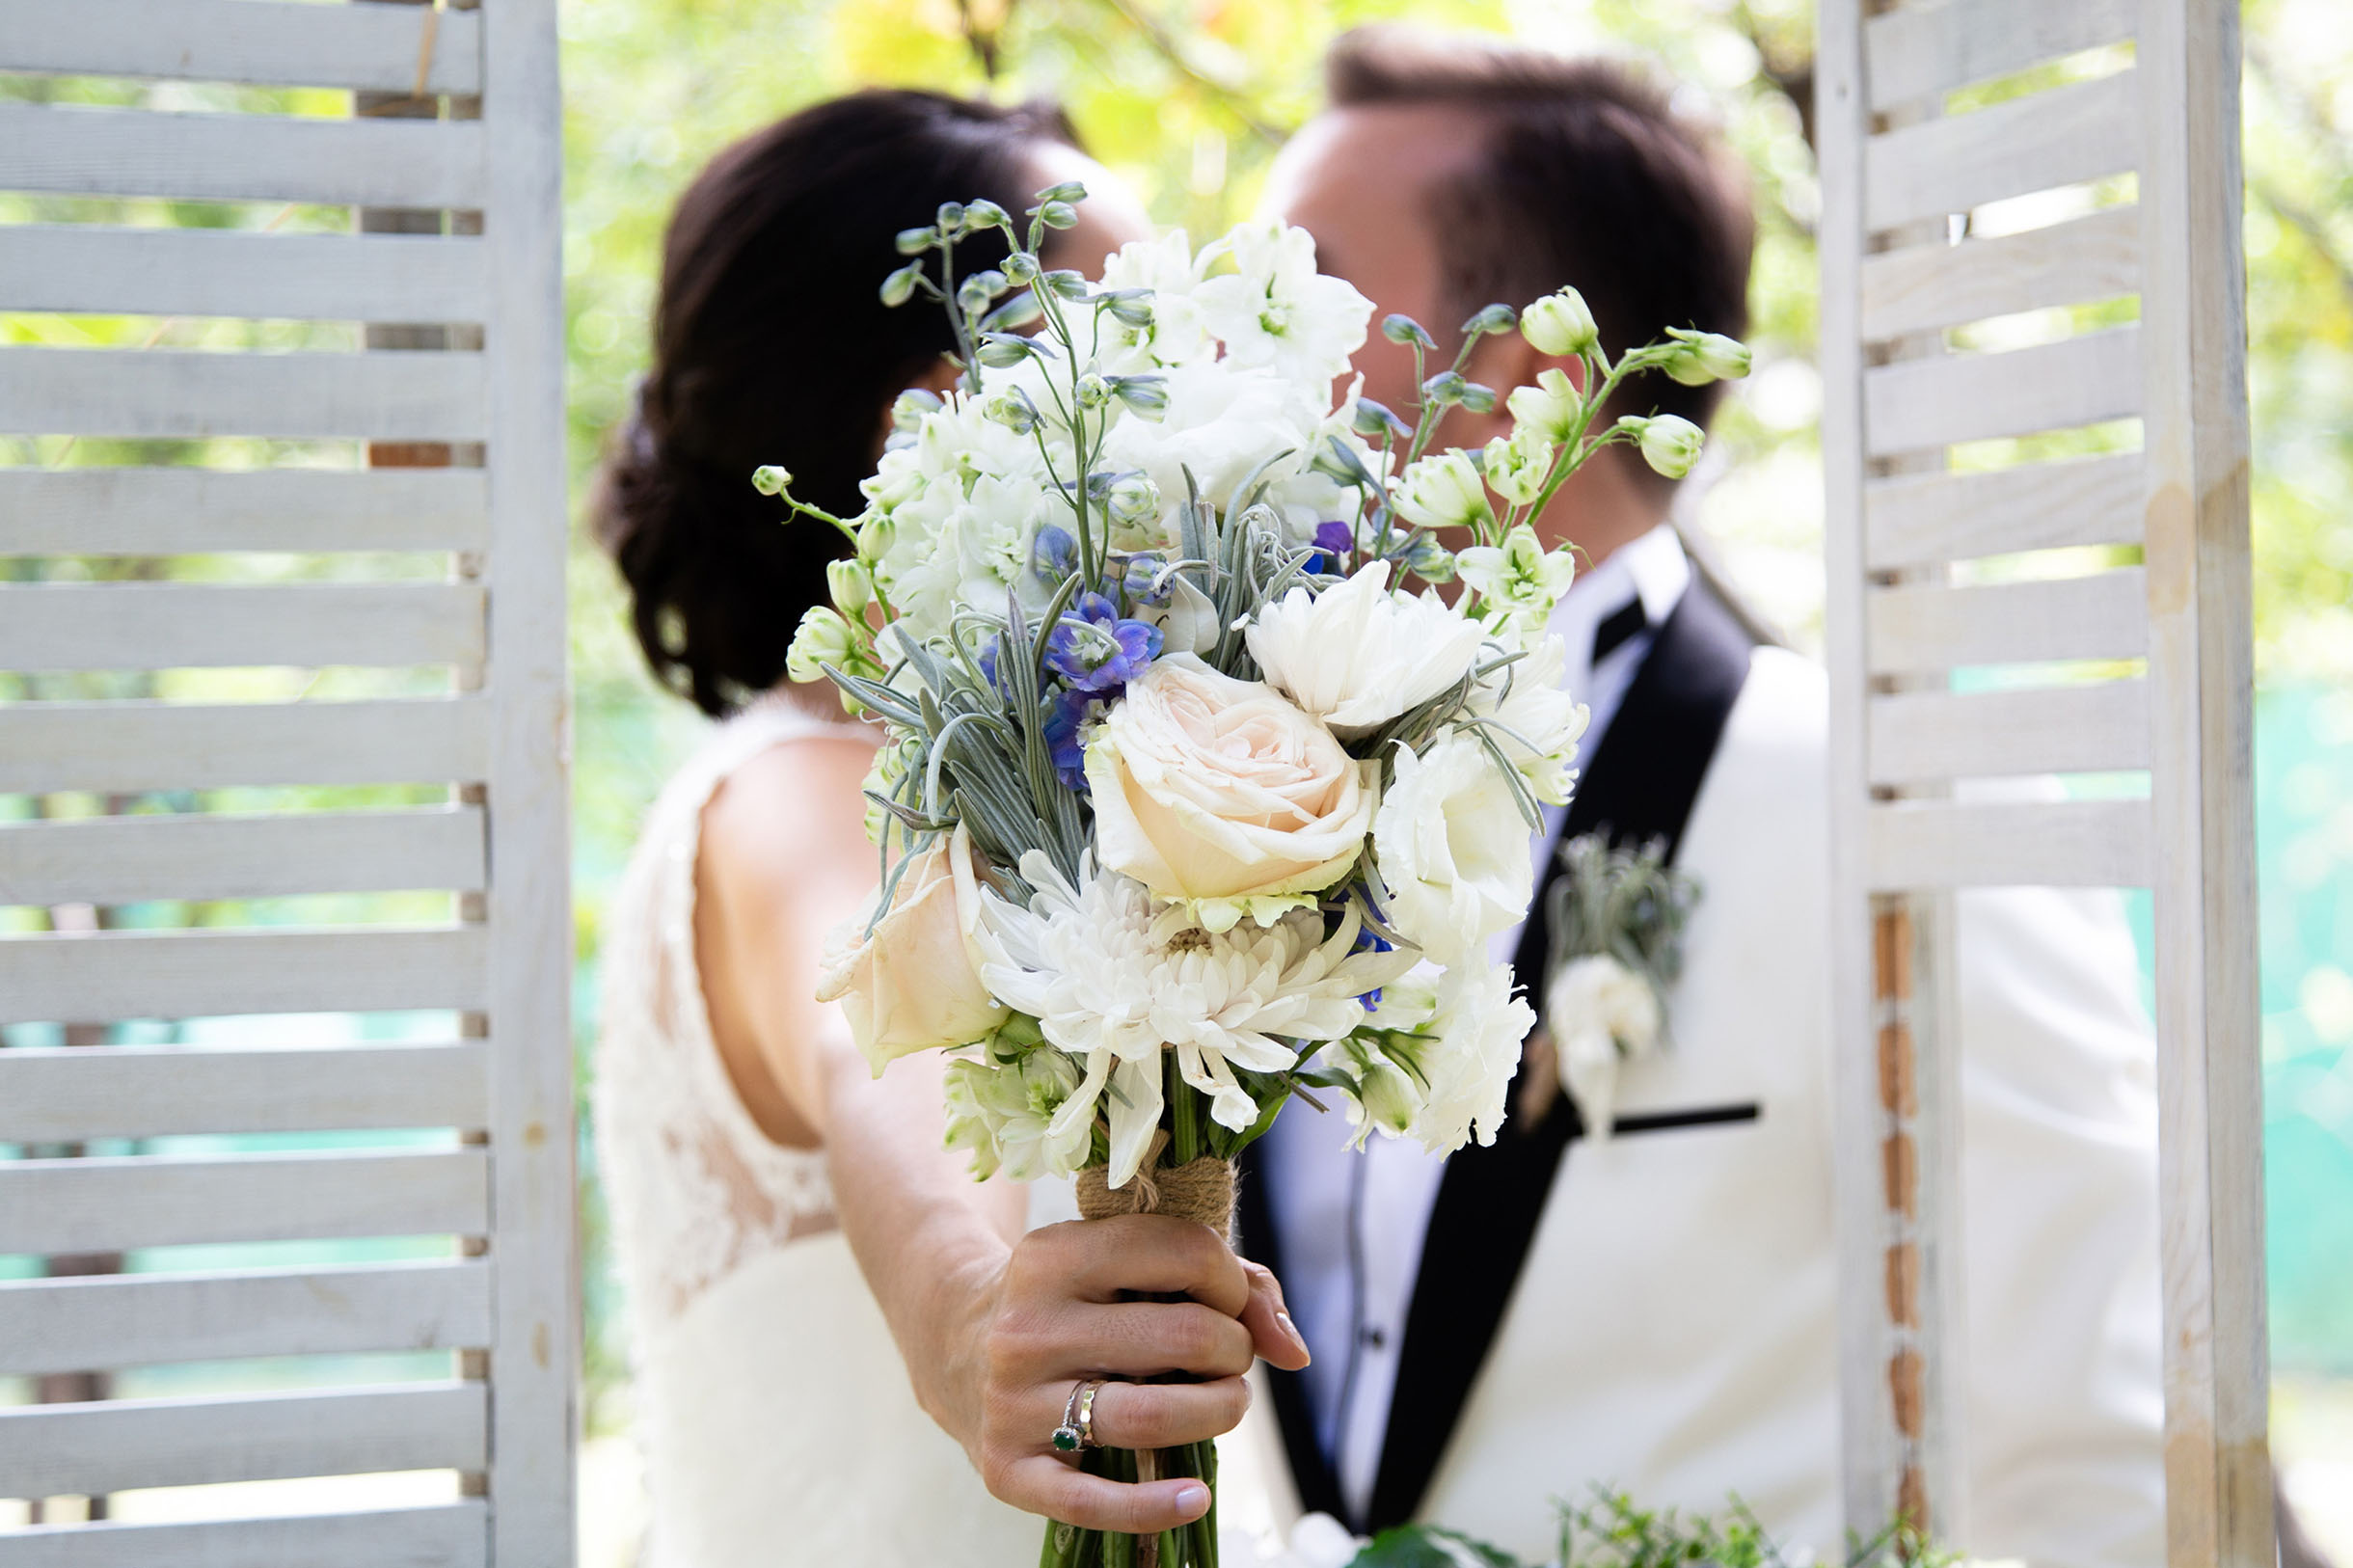 a couple kissing and posing, bride extending the bouquet to the camera, hiding their faces.